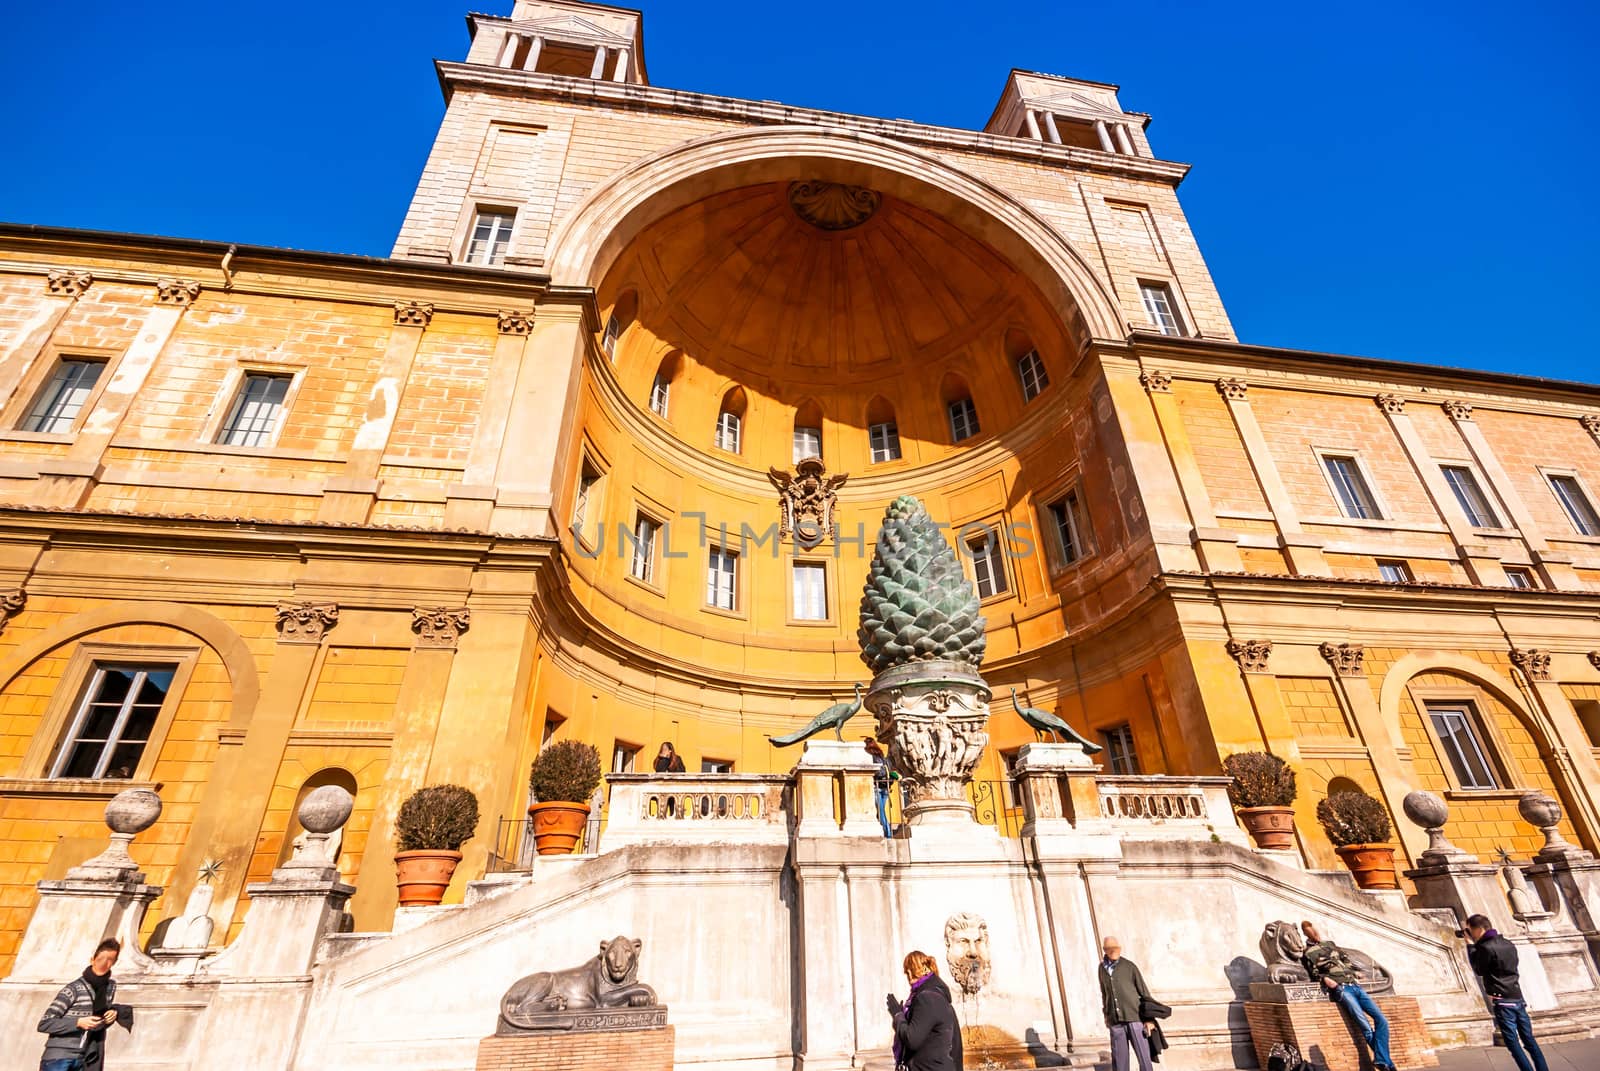 The Vatican Museums constitute a museum complex located in the Vatican. It brings together twelve museums, which represents five galleries and 1,400 rooms. The set houses one of the largest art collections in the world